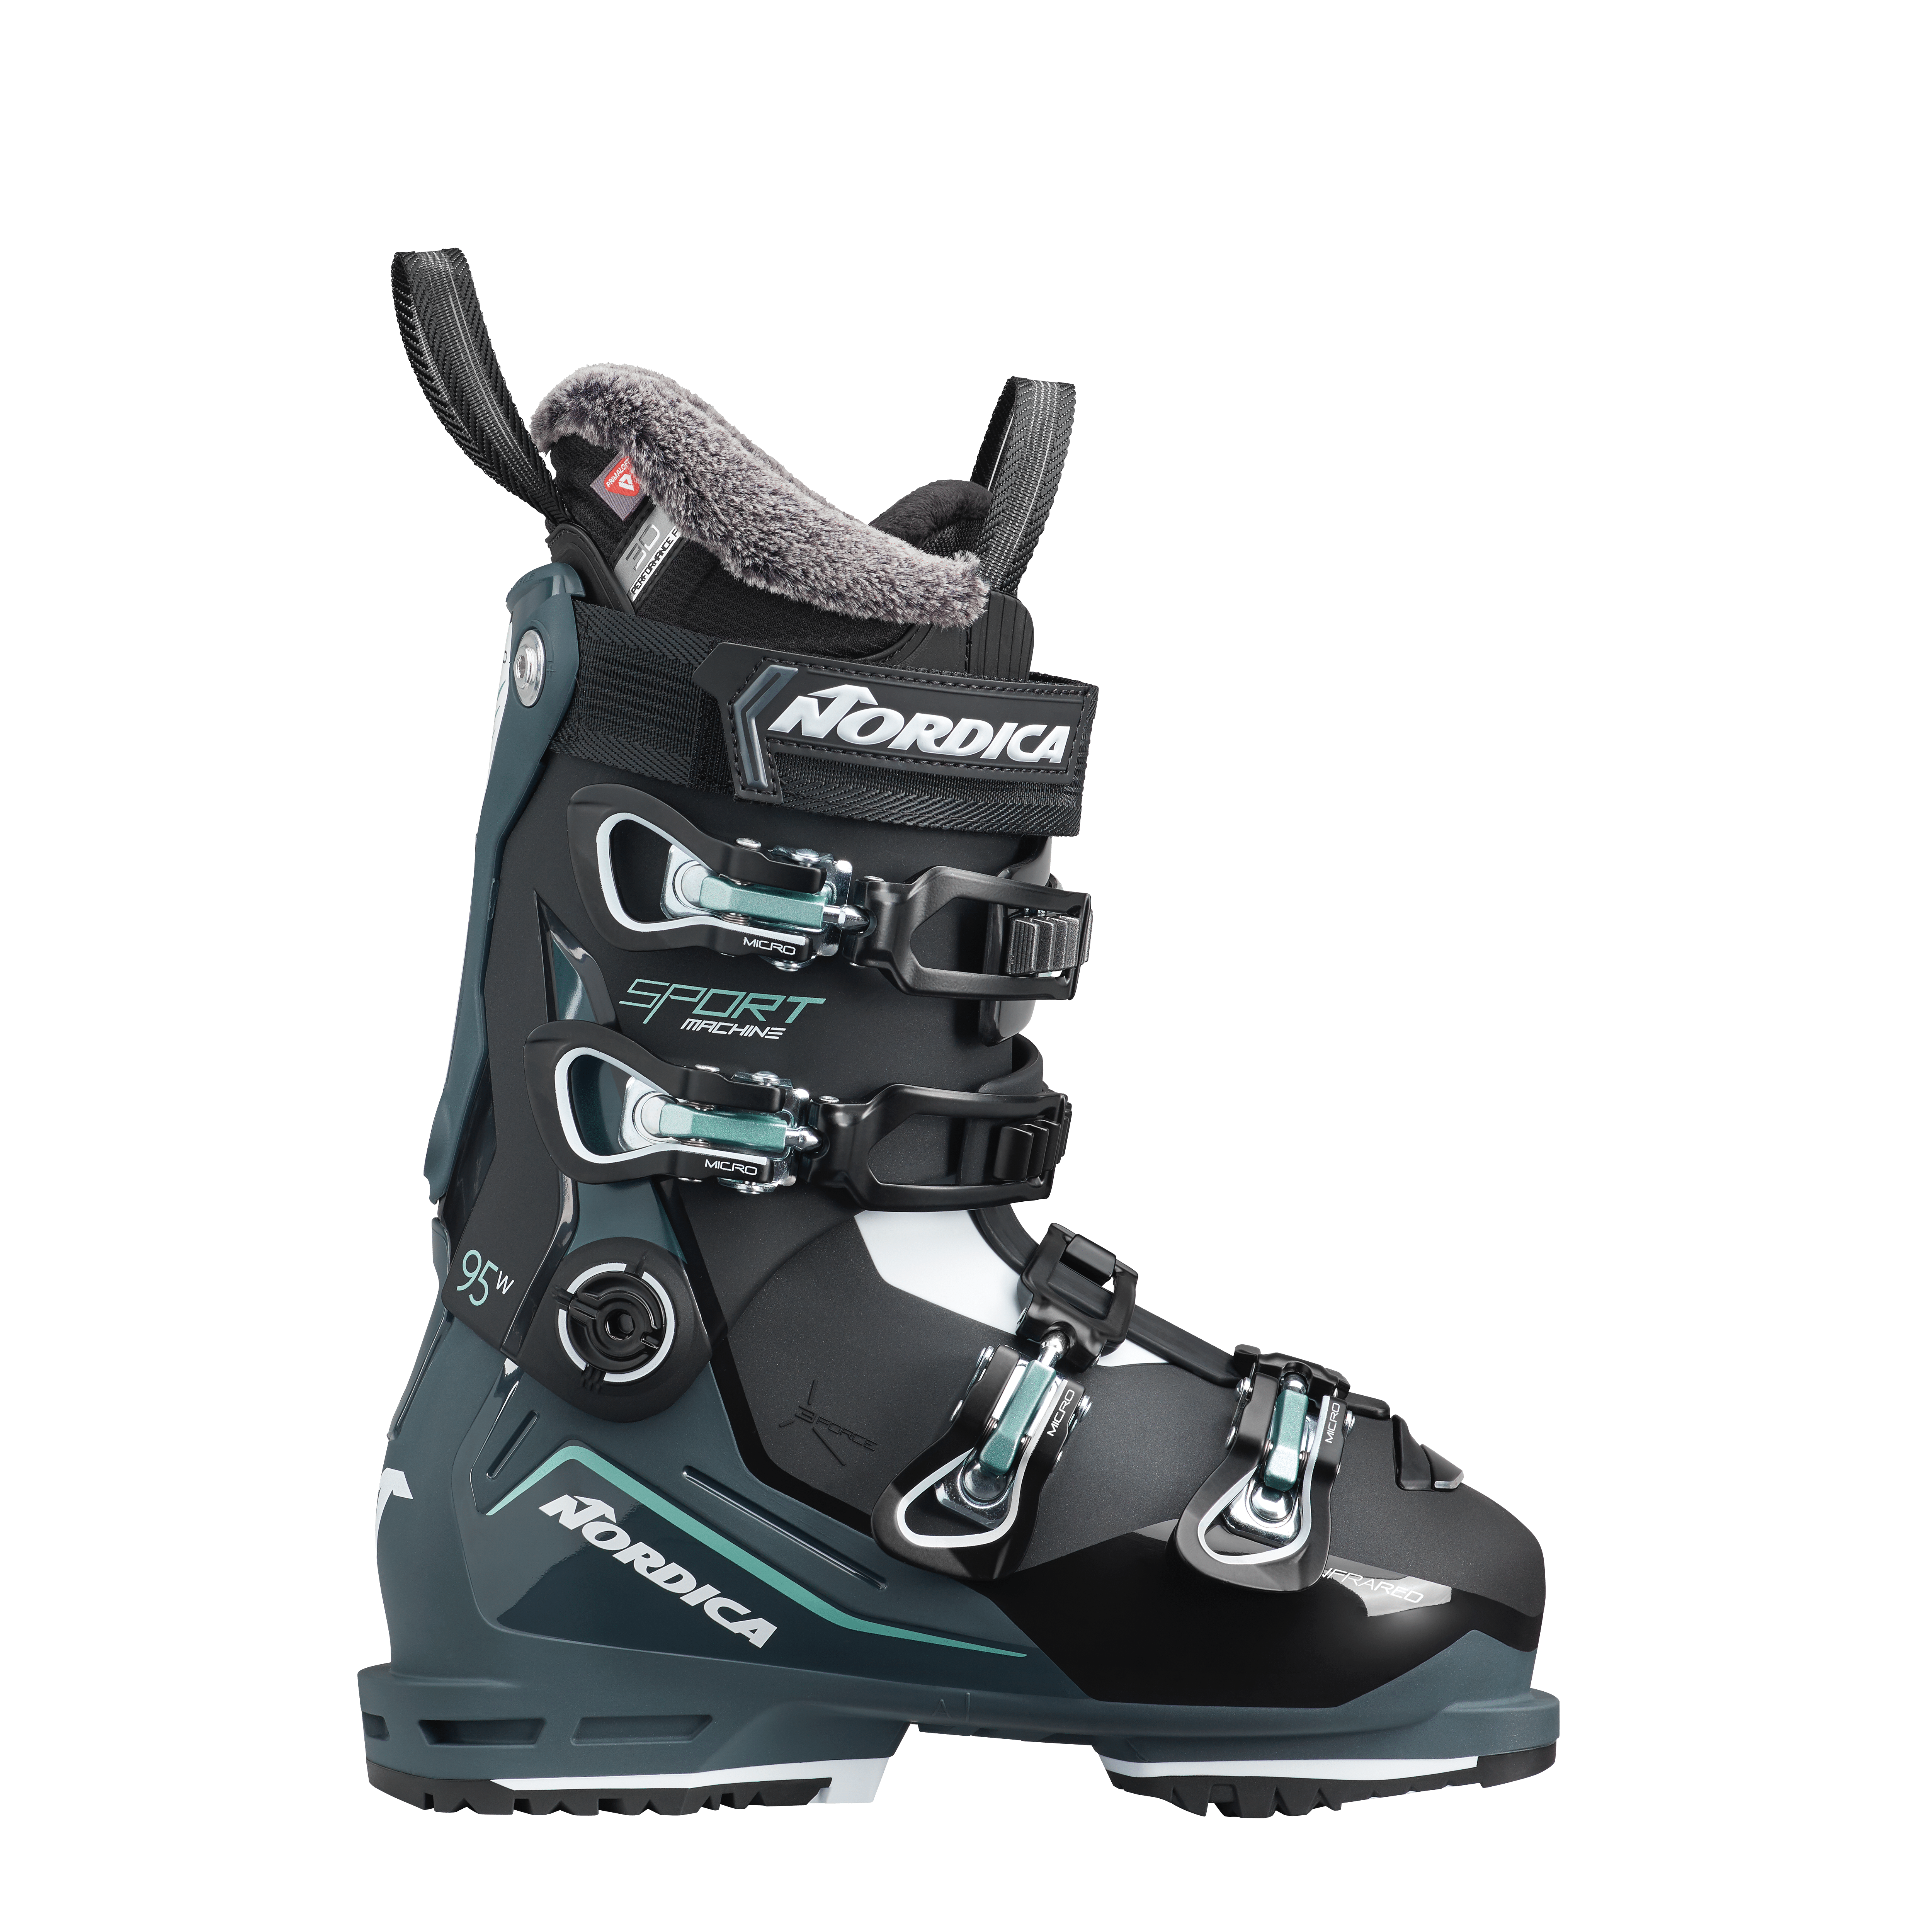 Sportmachine Nordica - Skis and Boots – Official website